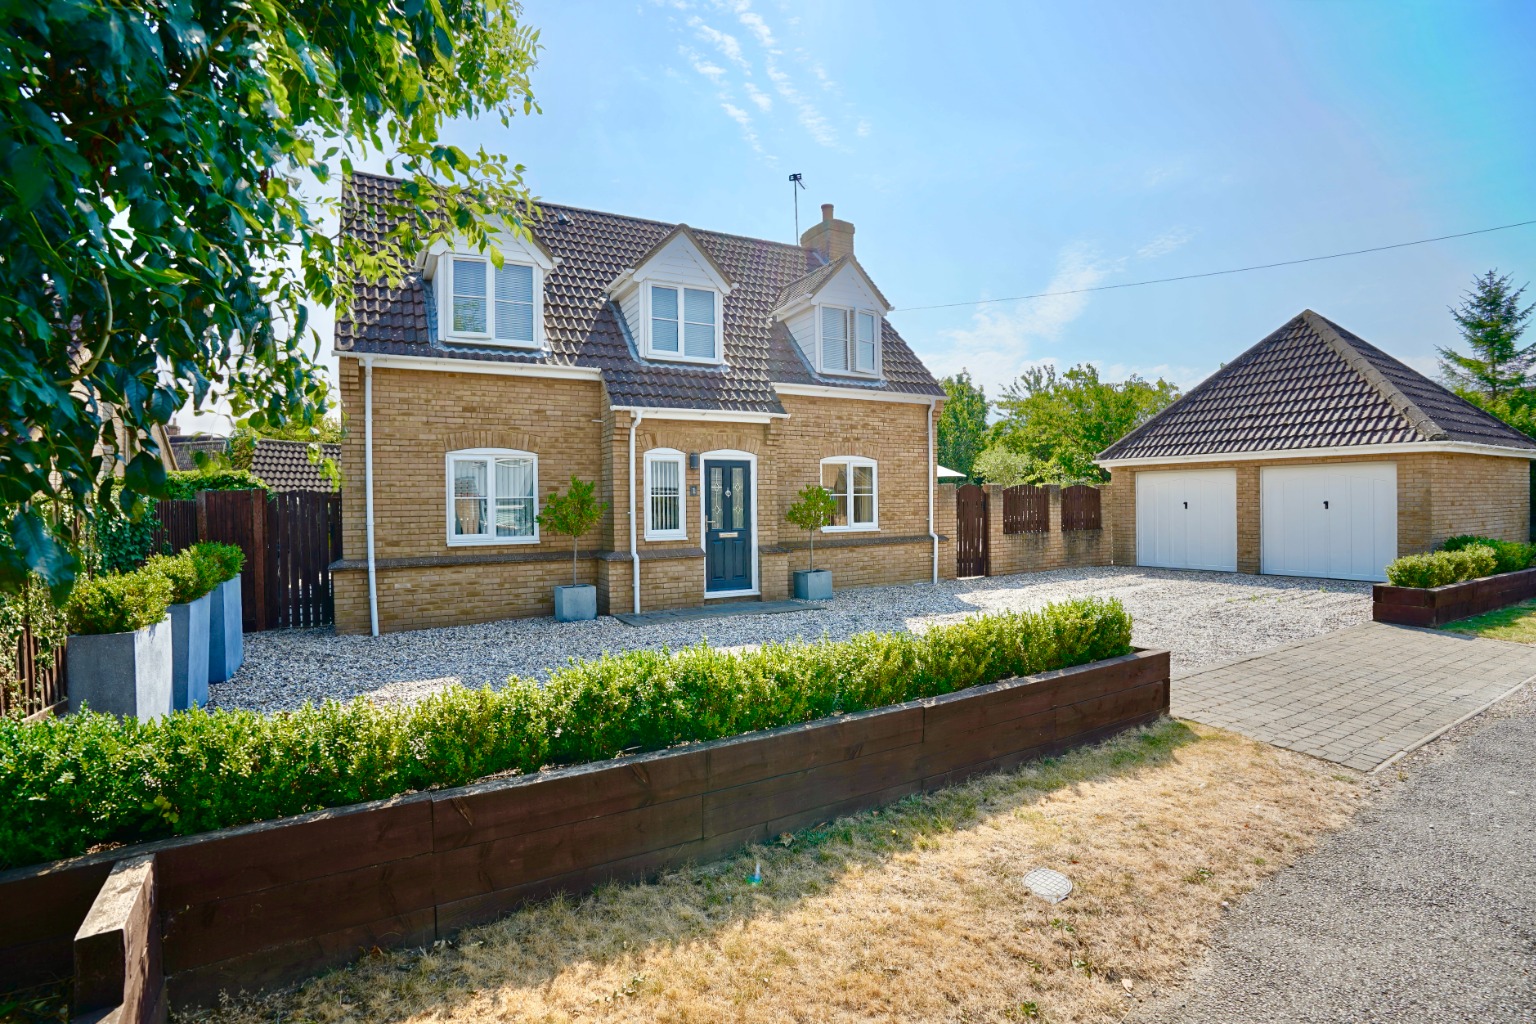 4 bed detached house for sale in Green Lane, St. Neots  - Property Image 1